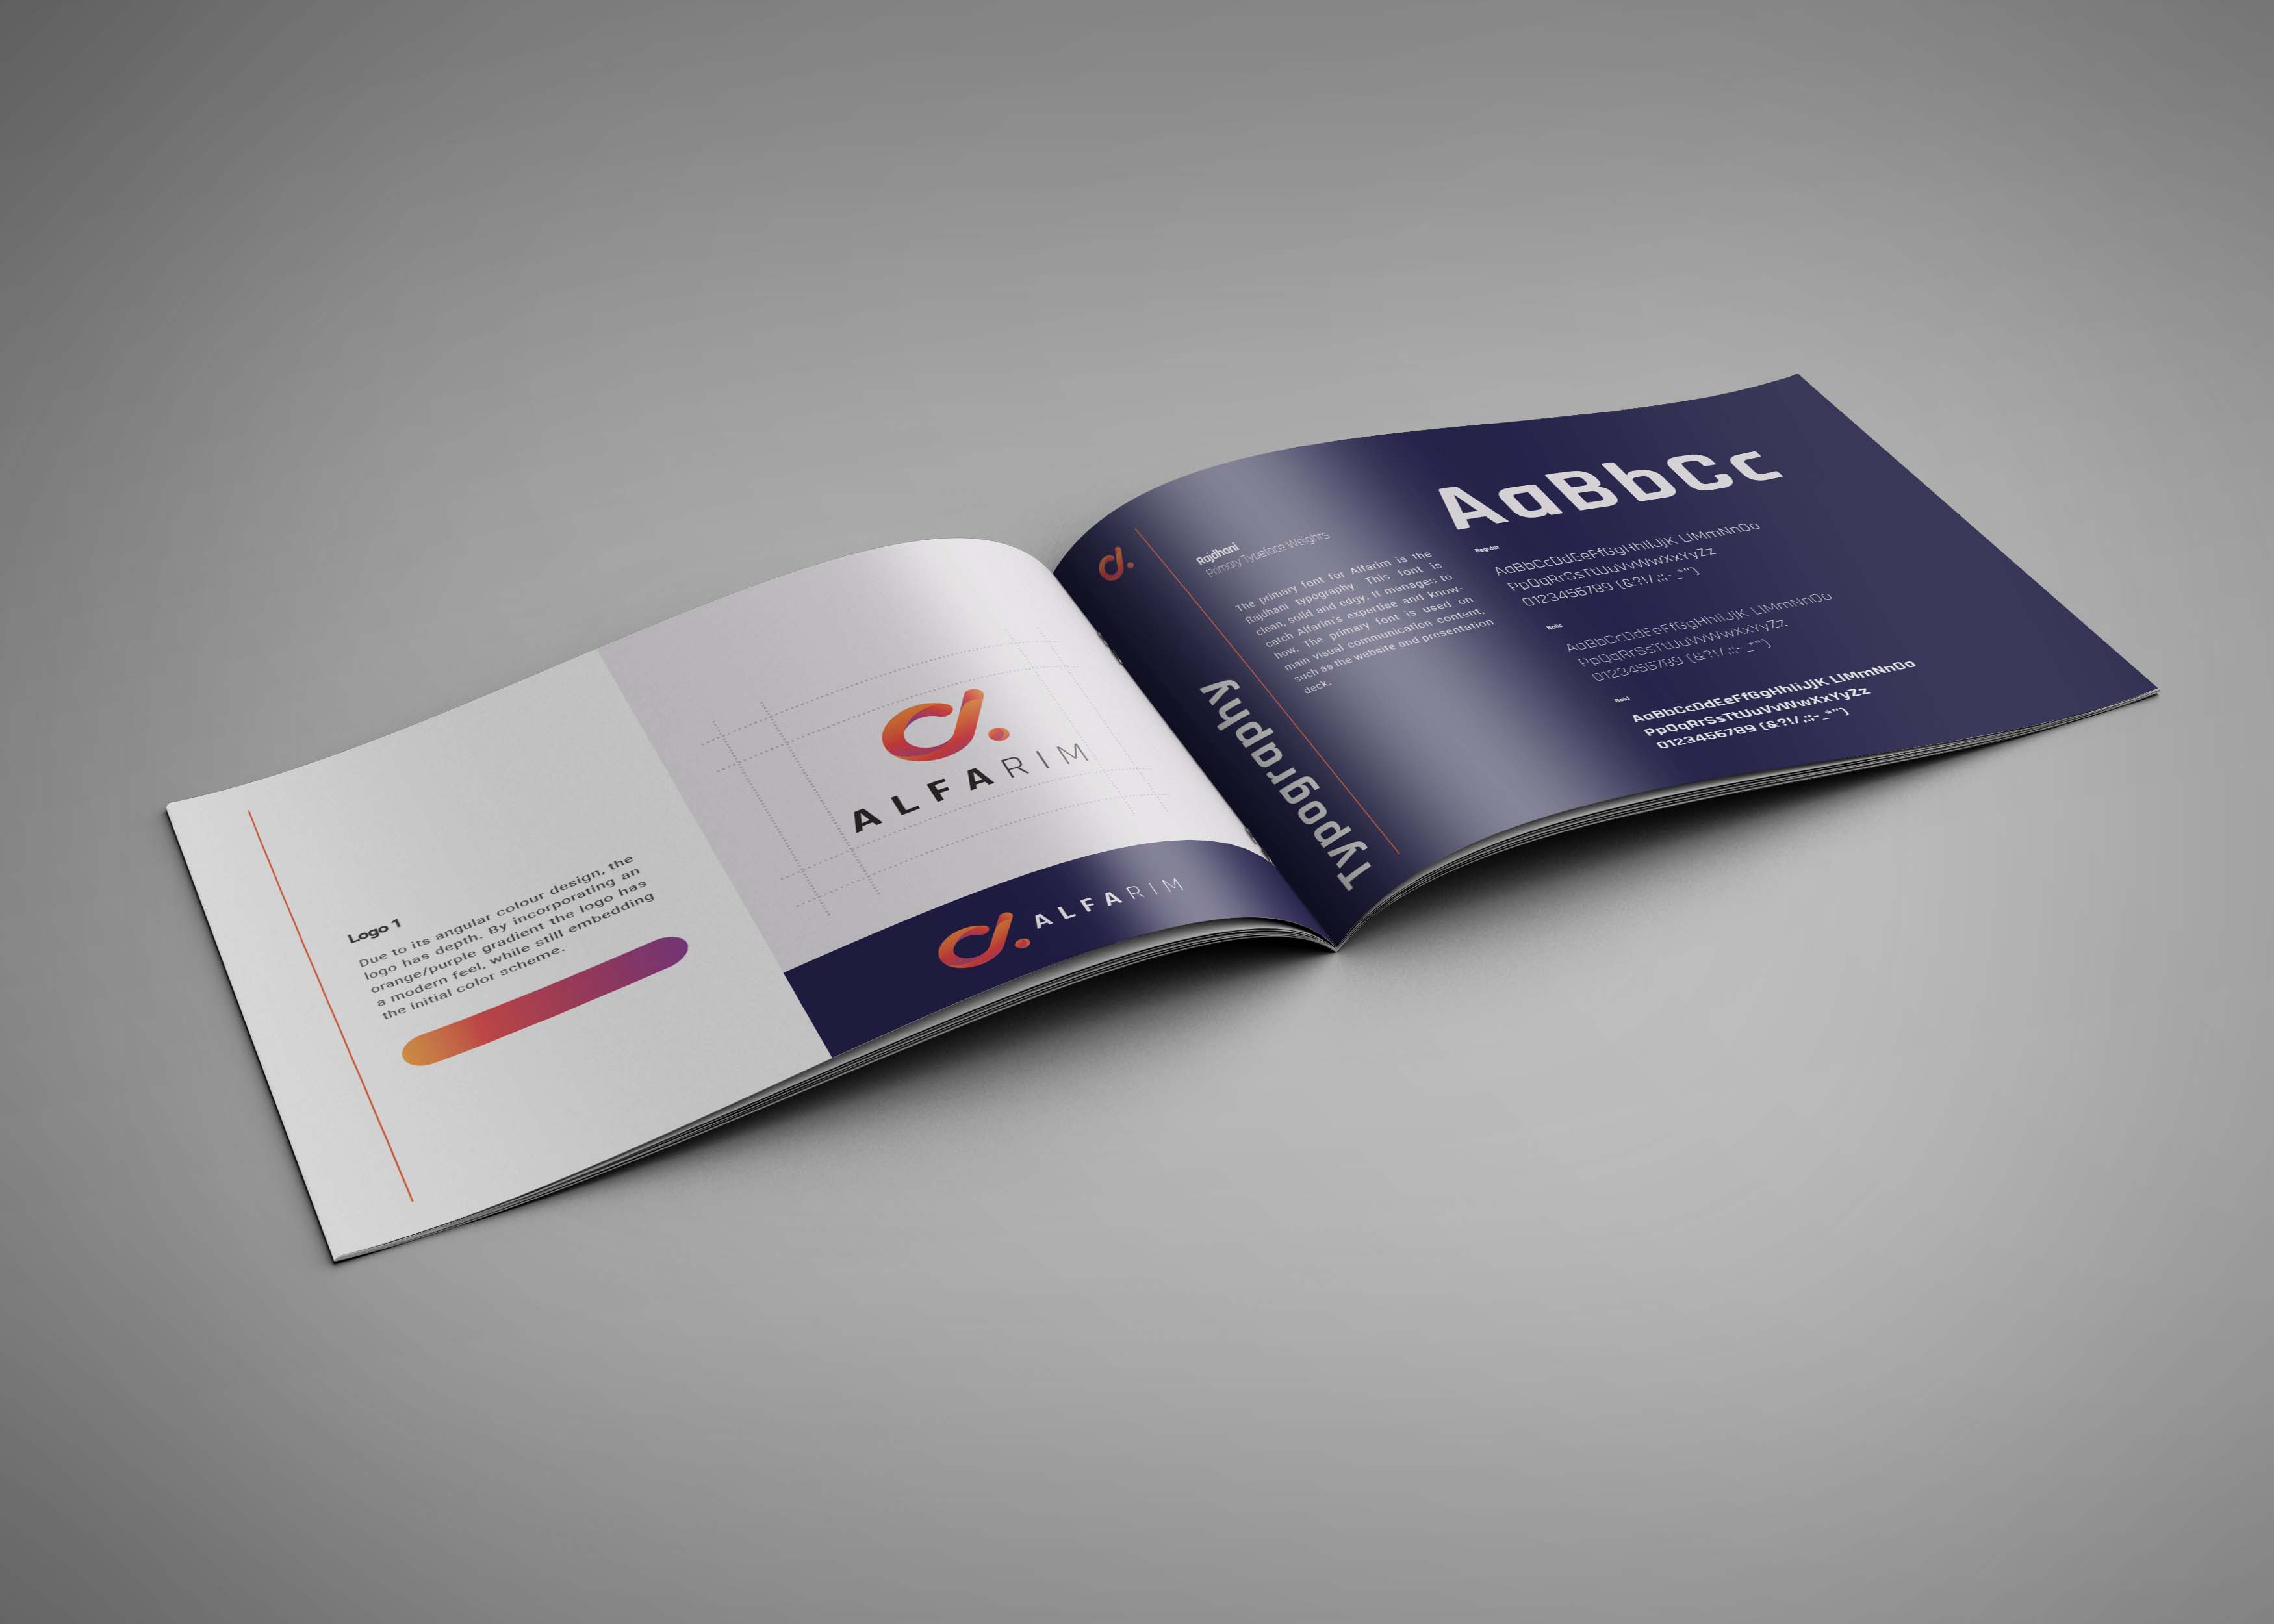 This mock-up image shows two pages from the branding style guide for Alfarim